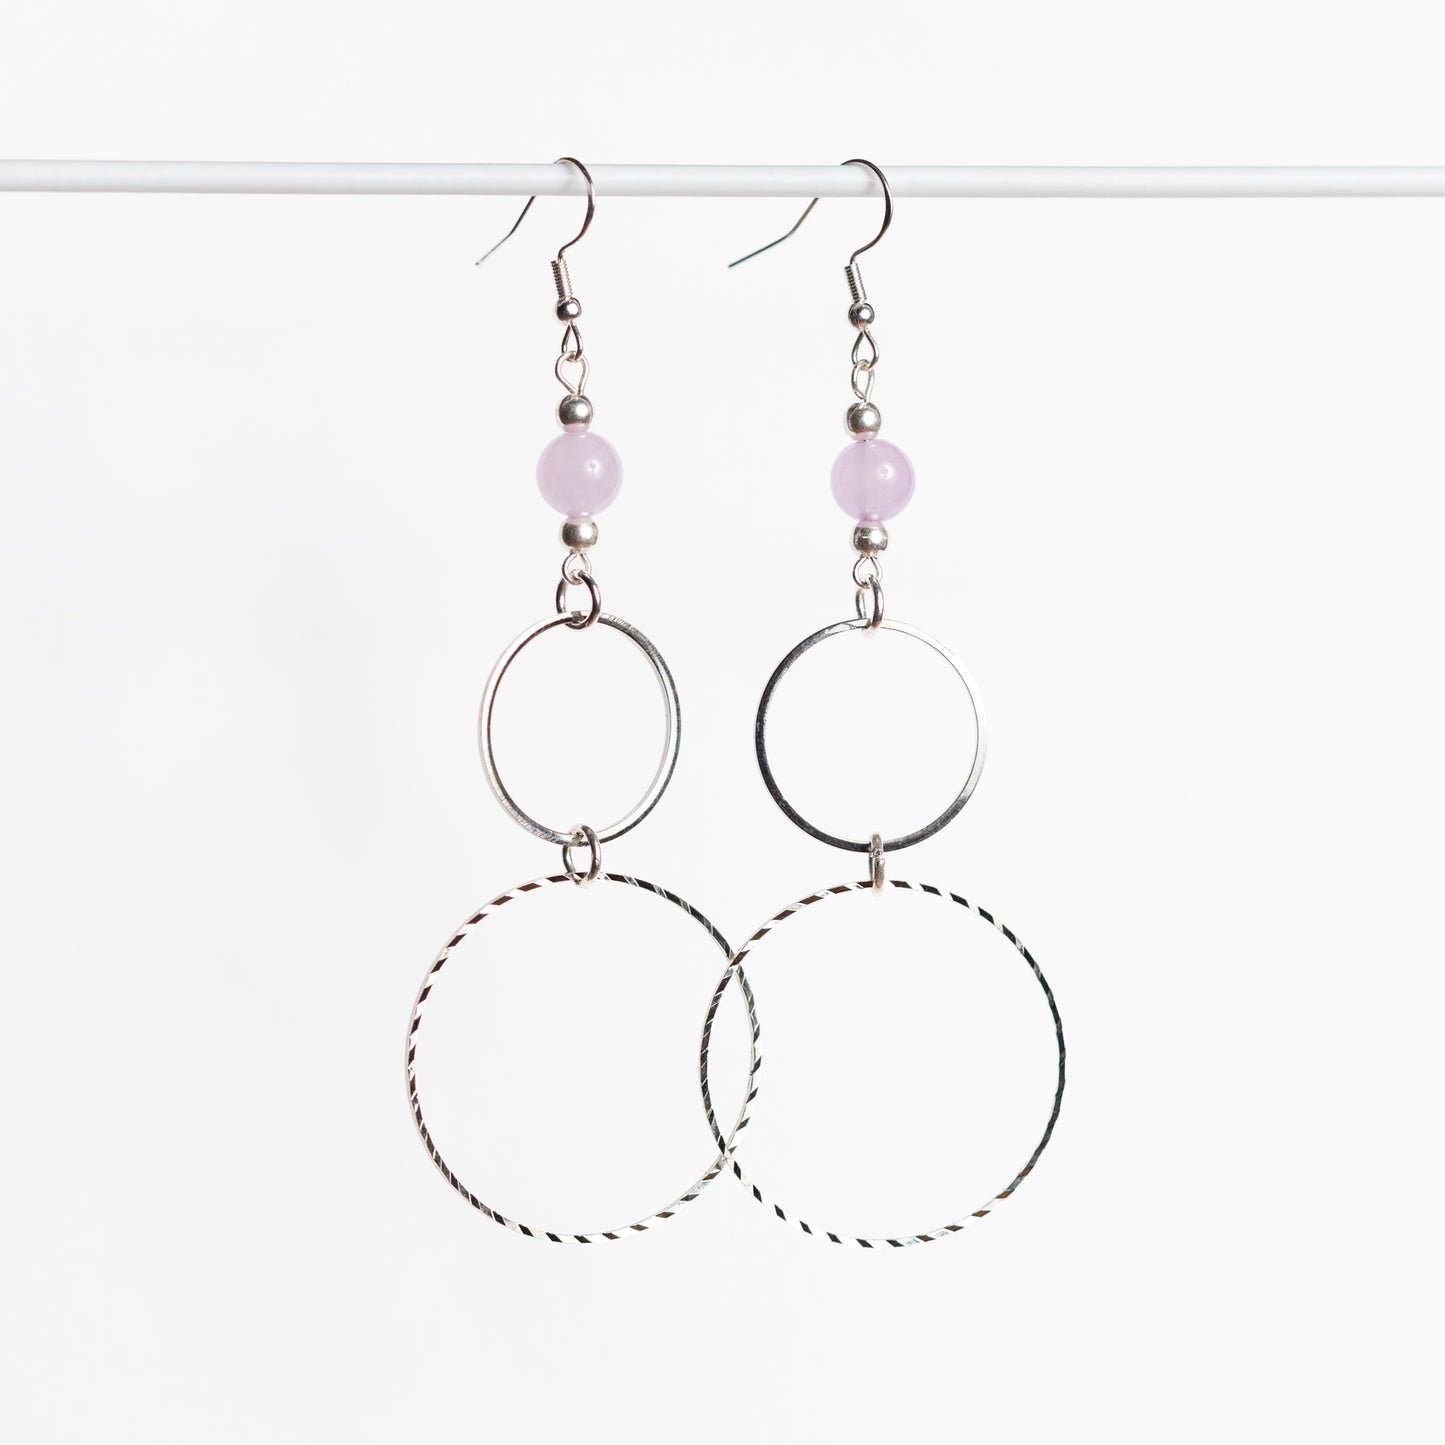 Silver Double Ring Hoops with Lavender Agate